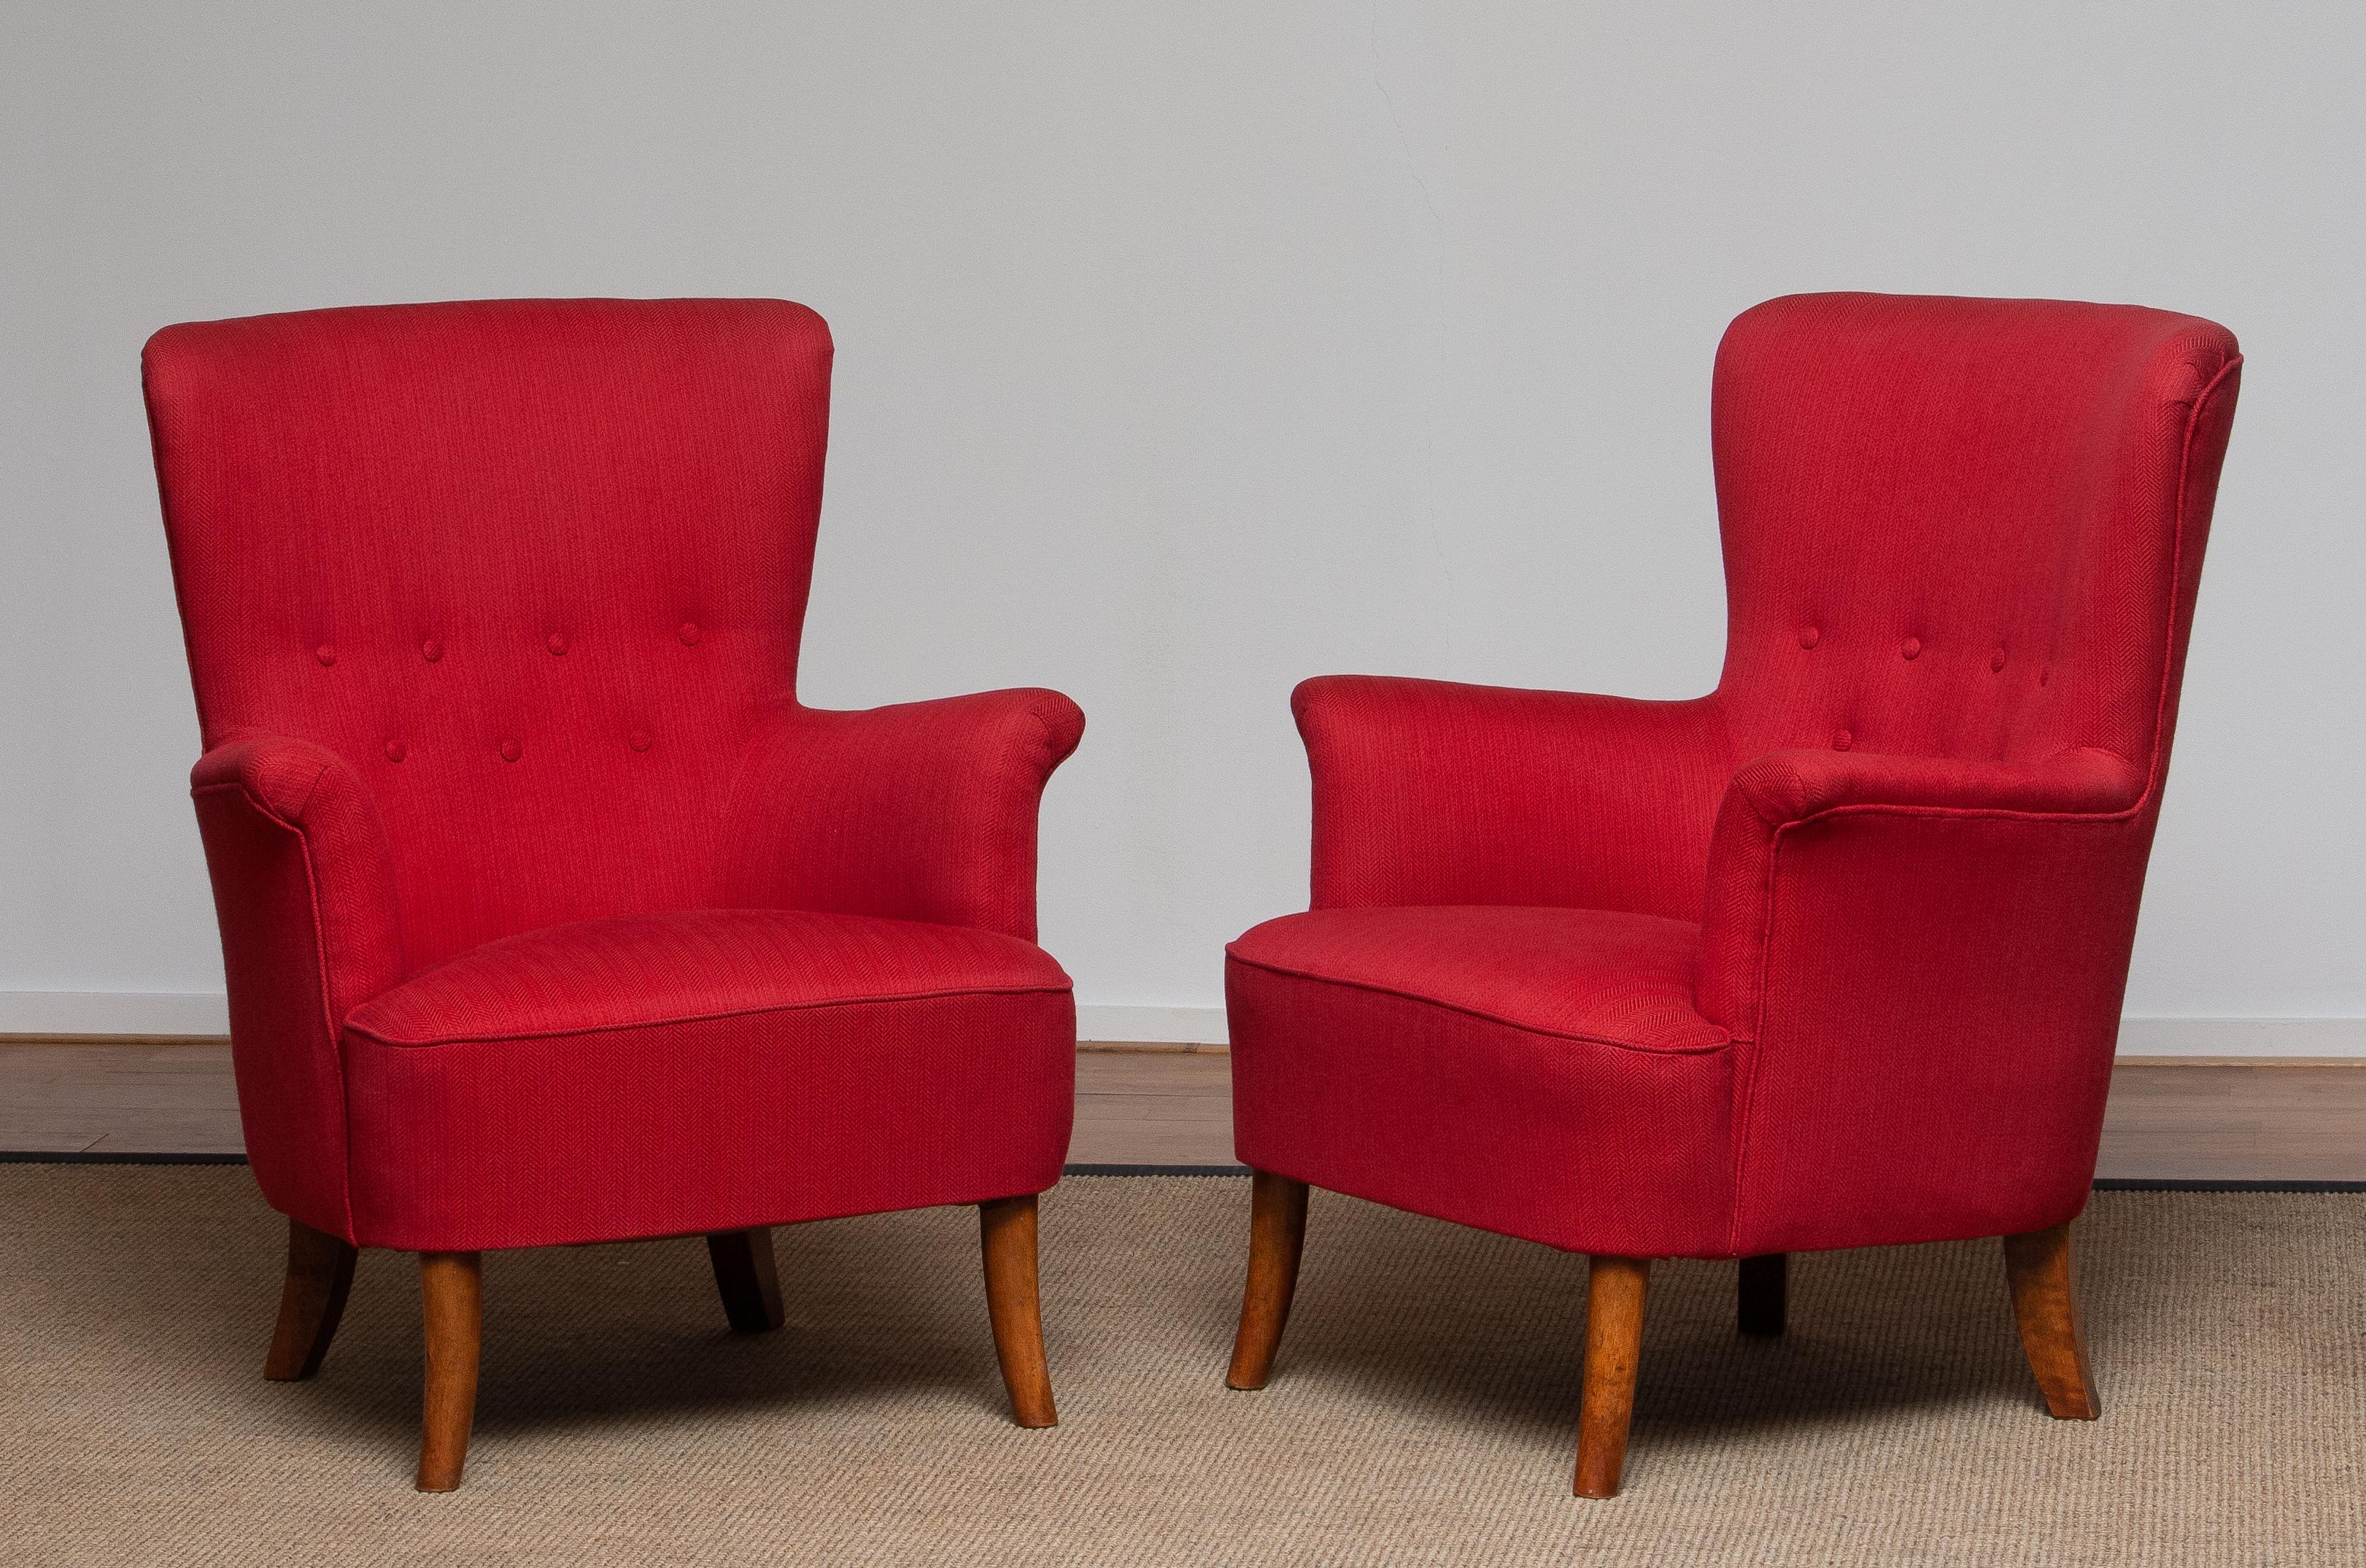 Beautiful set of two fuchsia / red easy / lounge chairs designed by Carl Malmsten for OH Sjogren, Sweden.
The overall condition is good and clean.
Period: 1940-1949.
Note that one chair has a tiny hole in the back which we will repair but it will